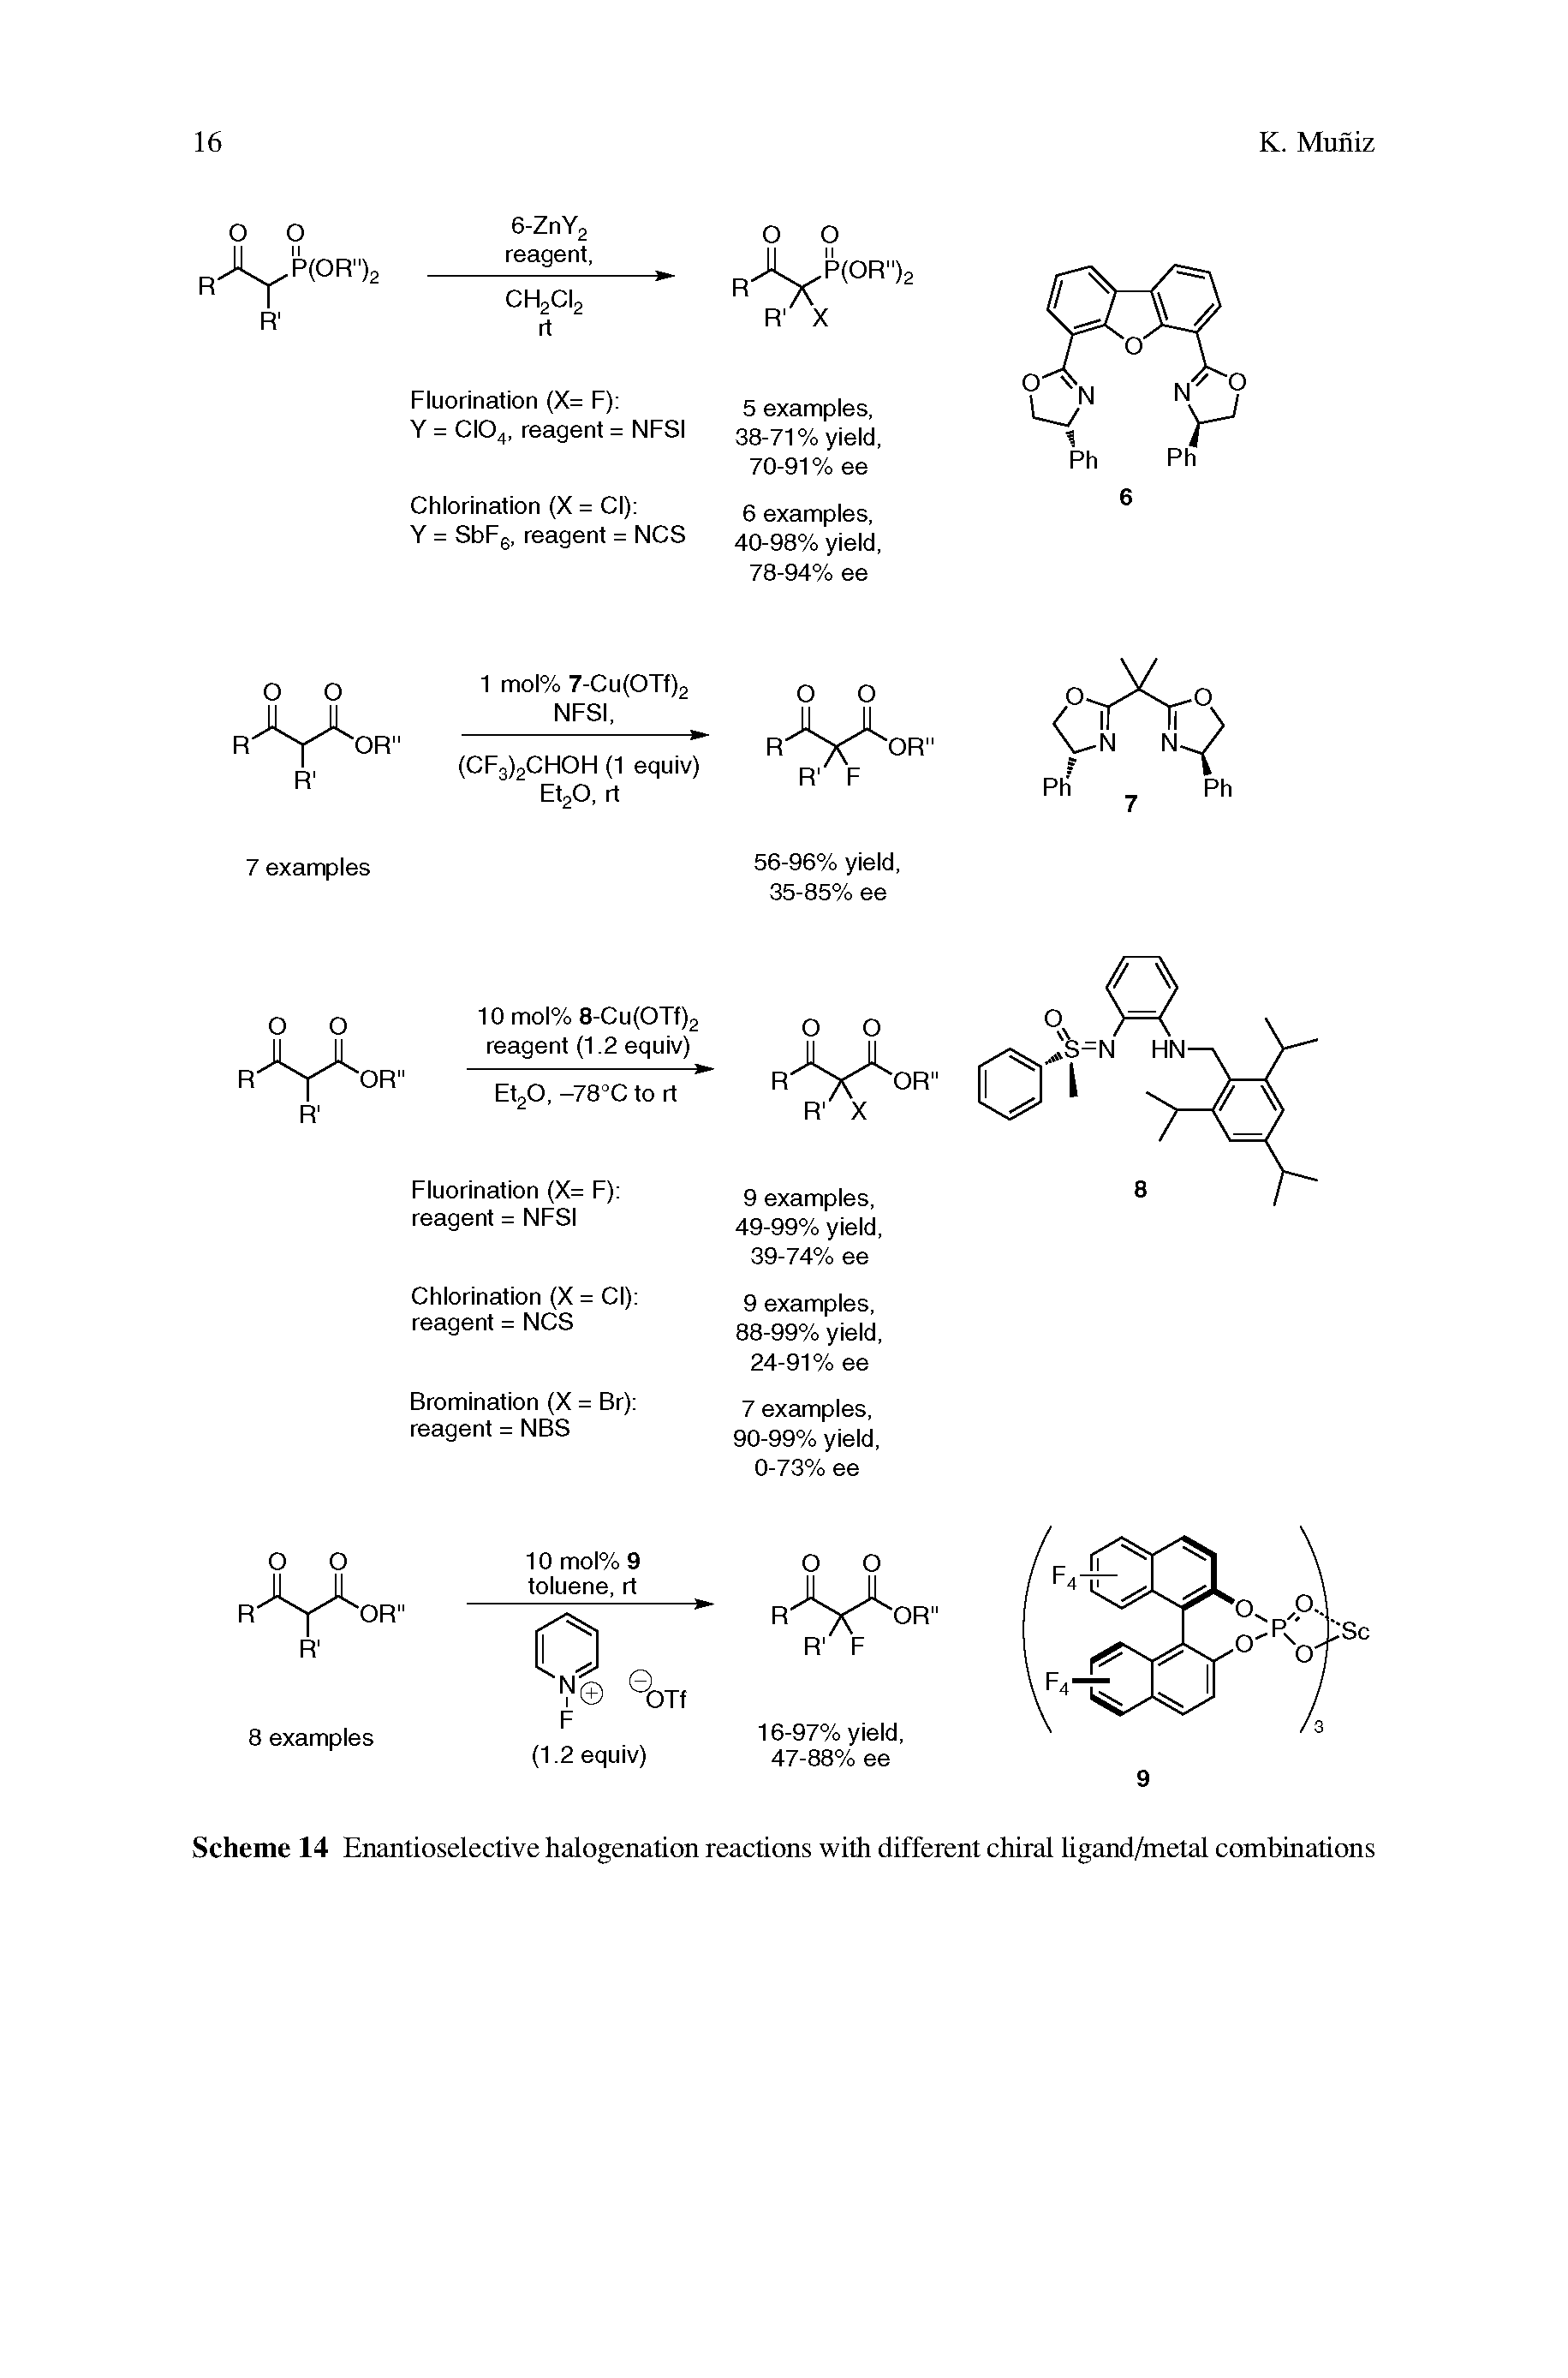 Scheme 14 Enantioselective halogenation reactions with different chiral ligand/metal combinations...